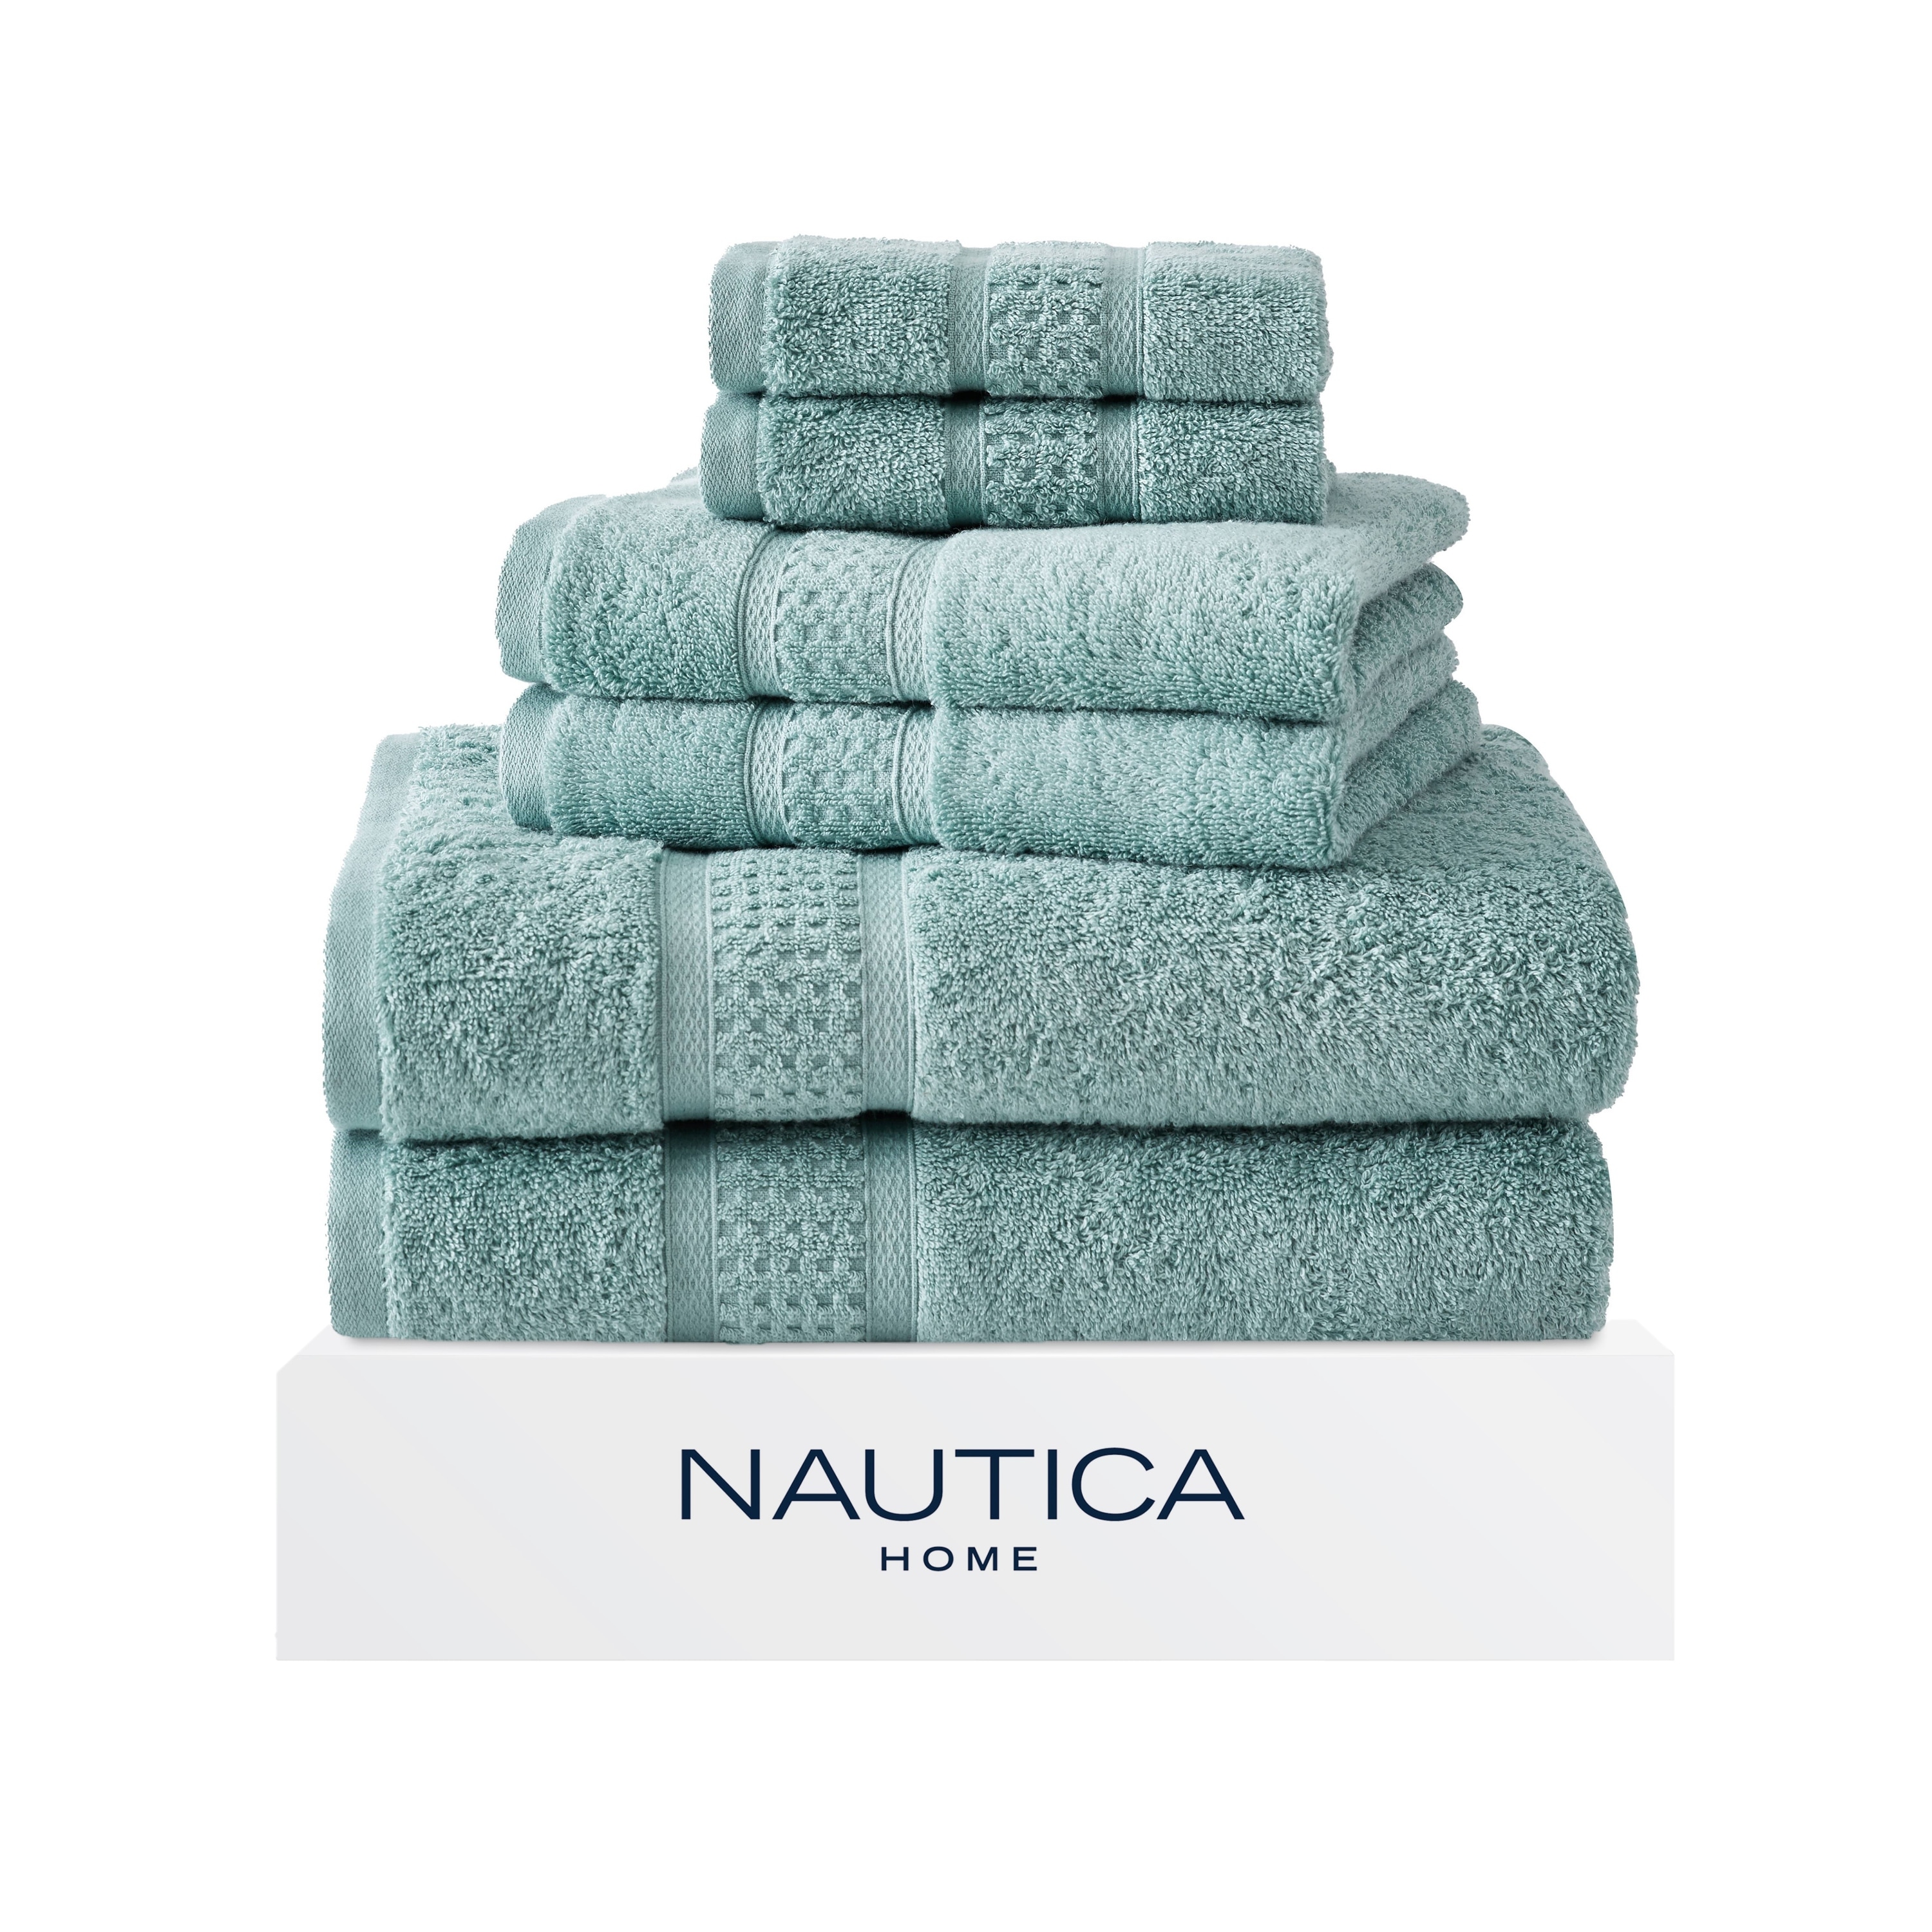 https://ak1.ostkcdn.com/images/products/is/images/direct/a8e58f4b74444ed3aeb6a33cafb18138c8f4fdfd/Nautica-Oceane-Solid-Cotton-6-Piece-Towel-Set.jpg